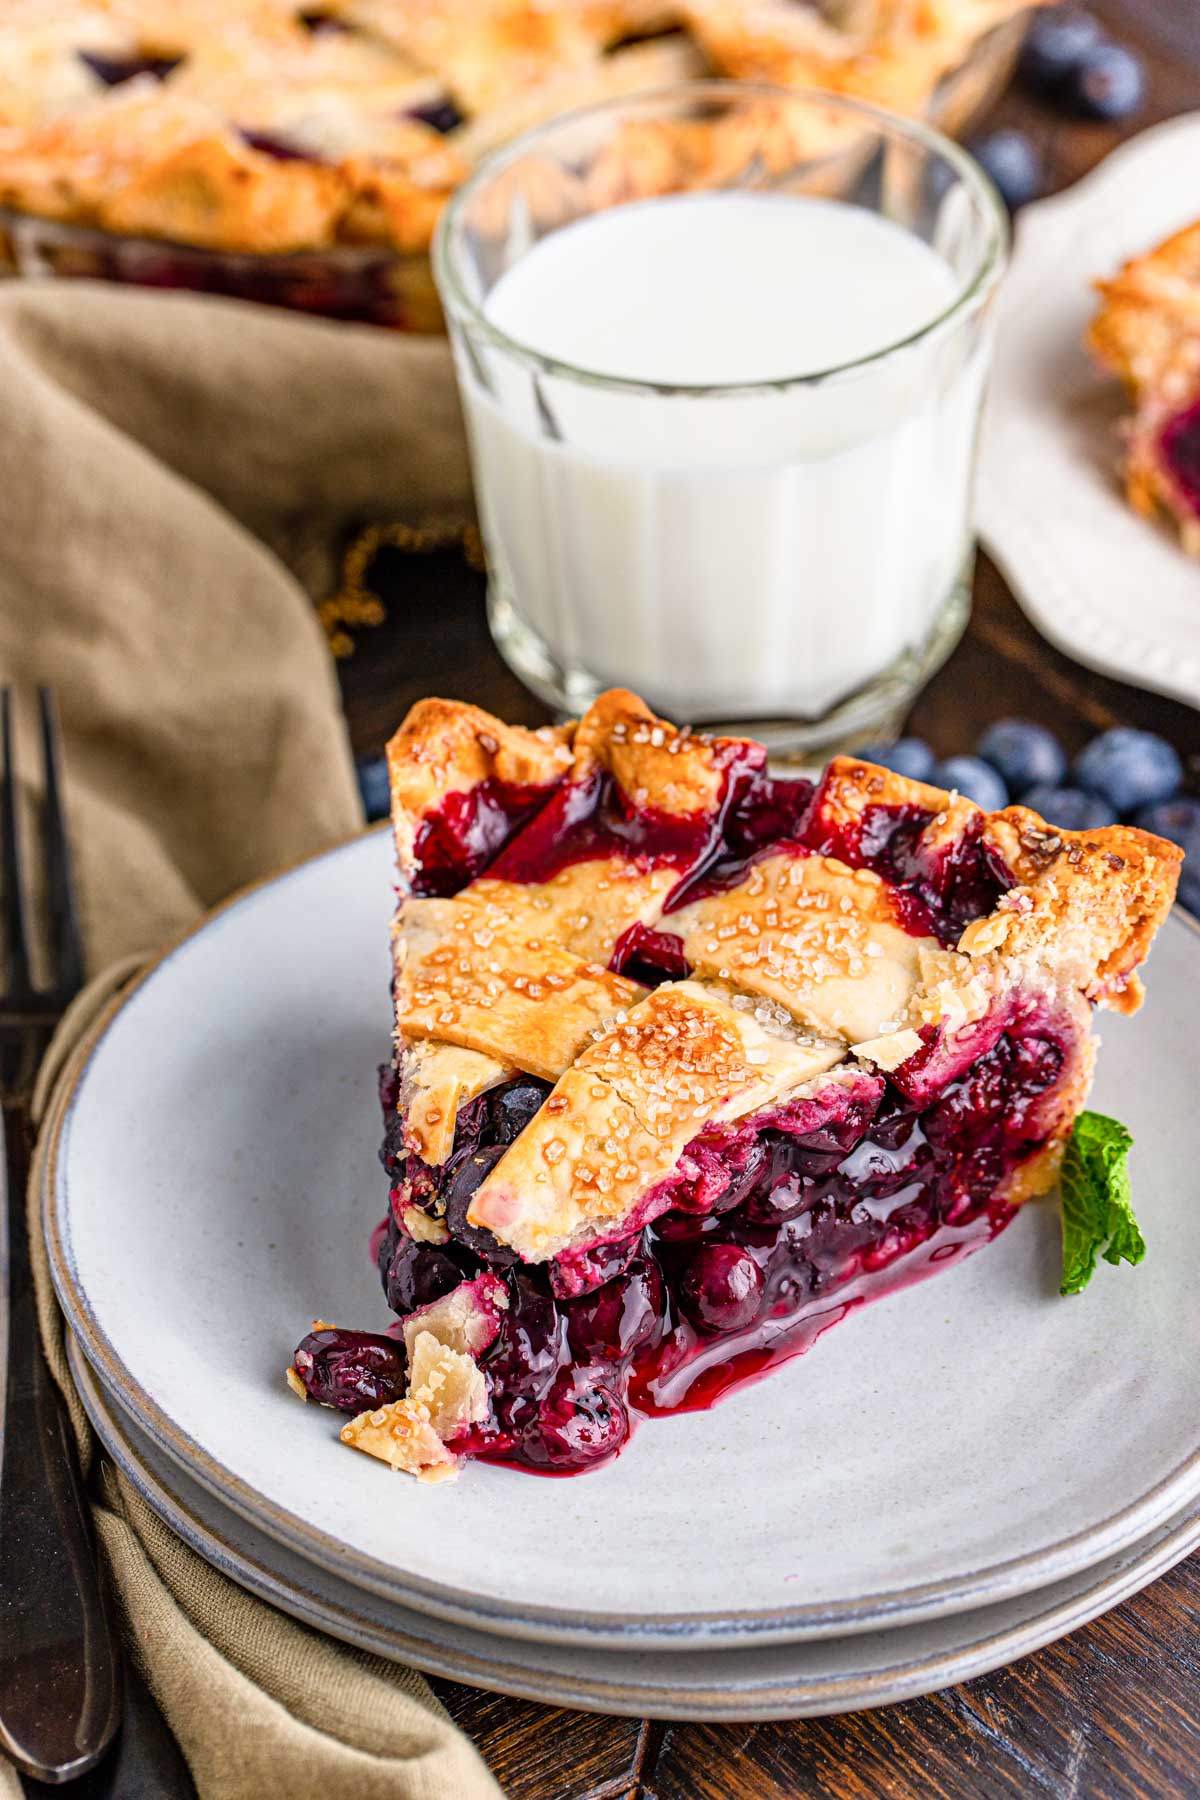 Classic Blueberry Pie (With Lattice Crust) - Sugar and Soul